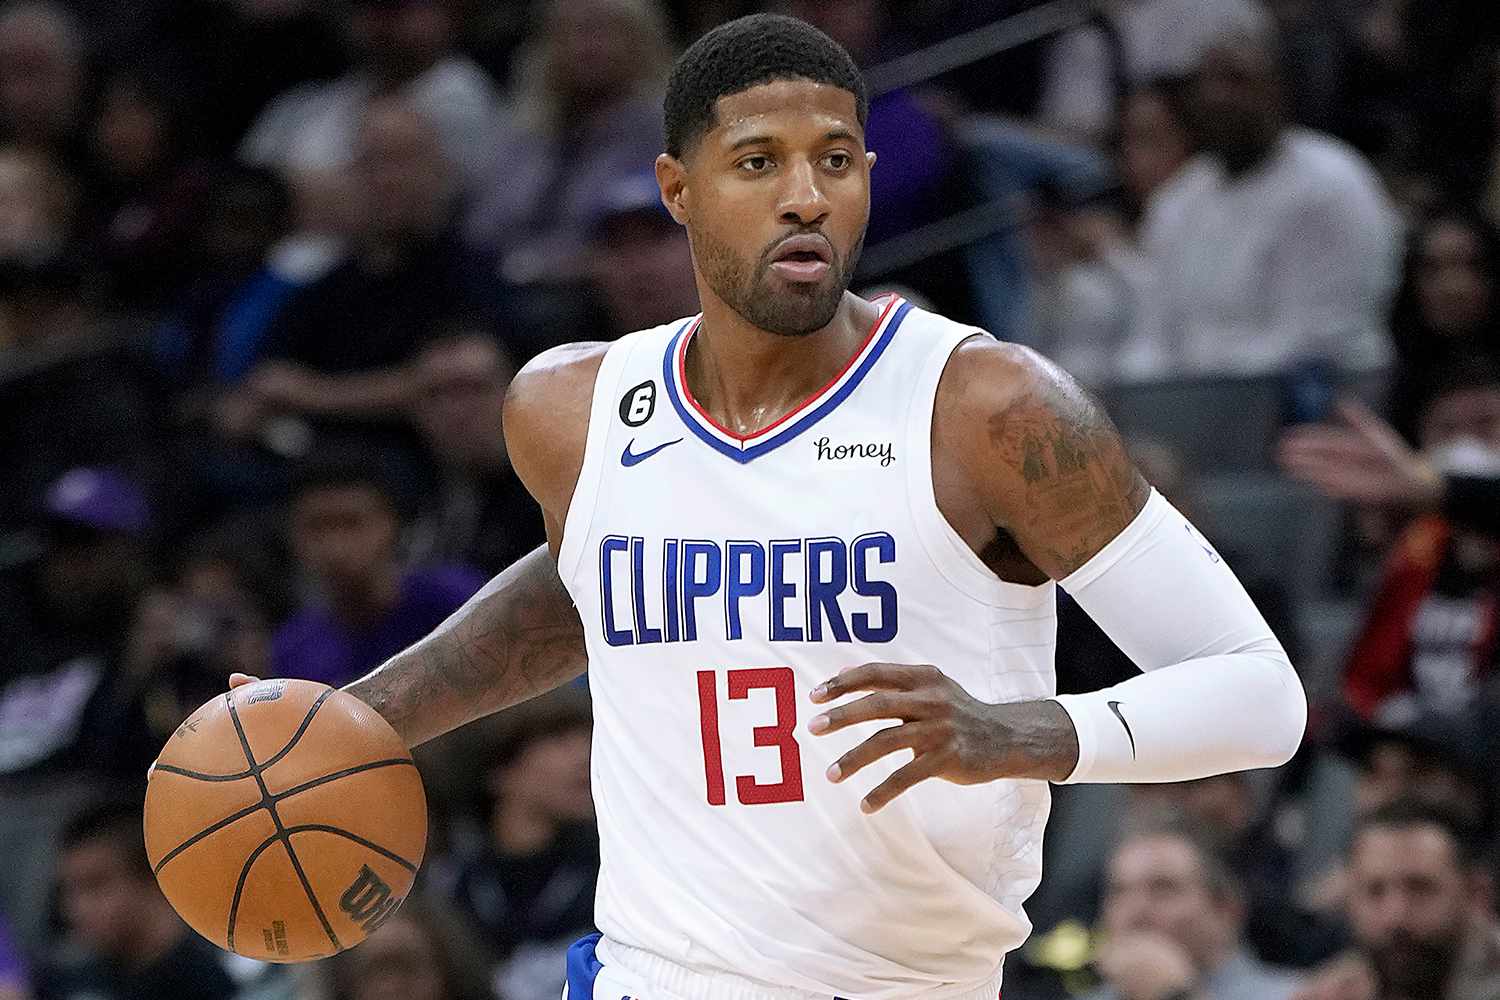 Clippers' Negotiation Tactics with Paul George A Risky Gamble That Could Backfire 3